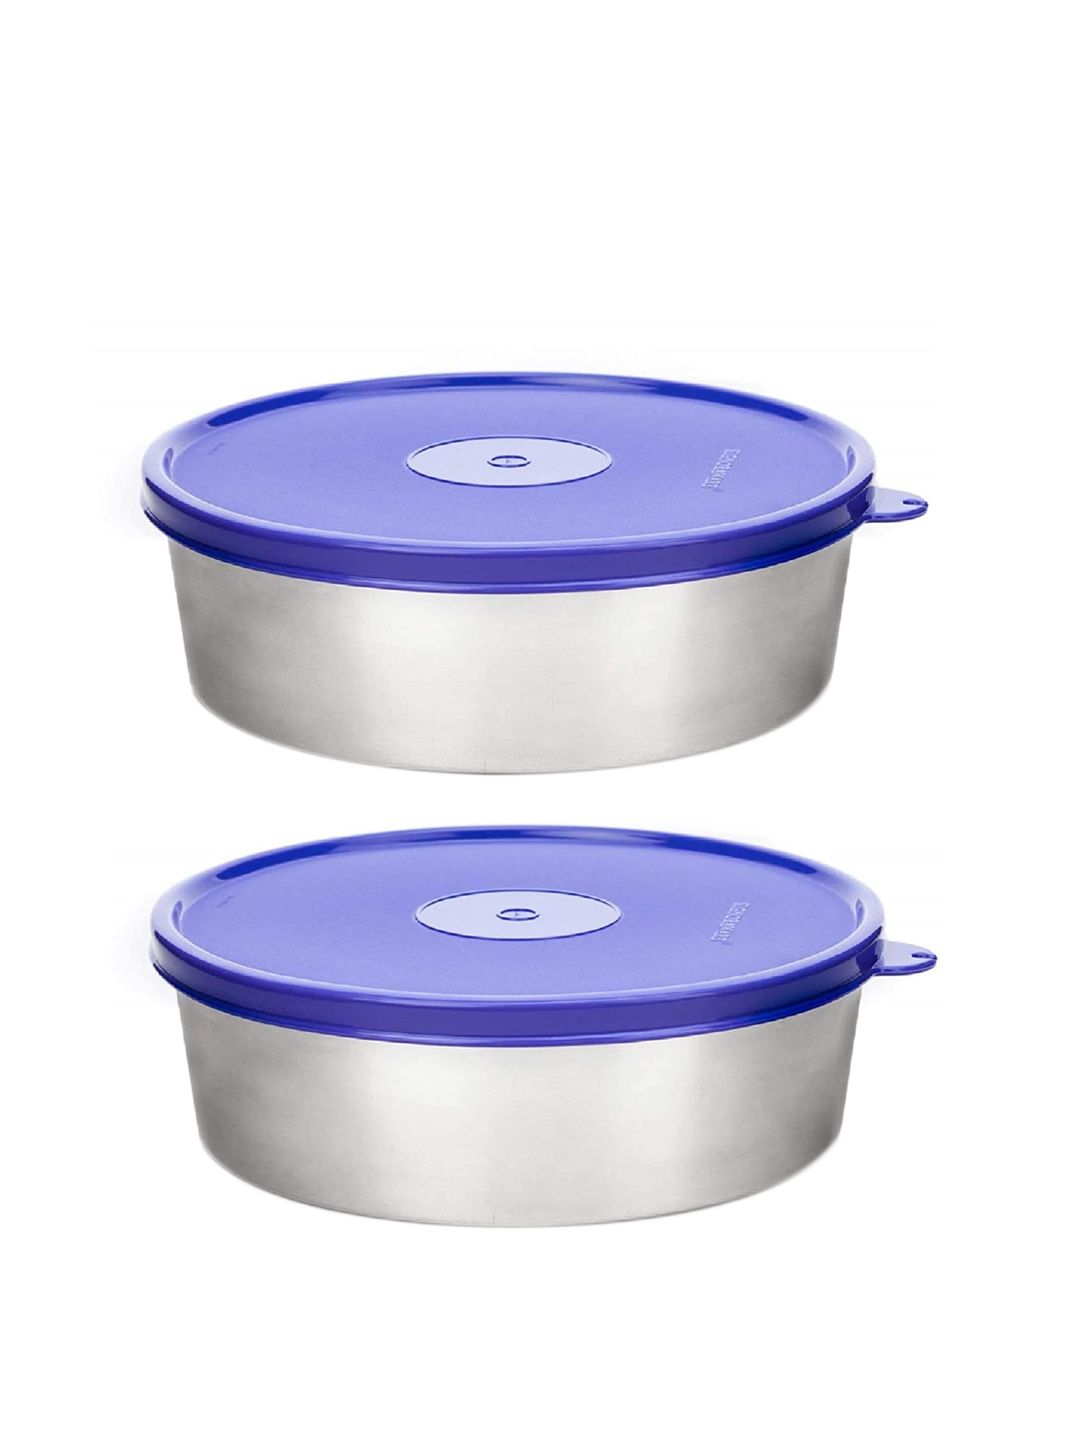 SignoraWare Set of 2 Violet Steel Food Container Price in India